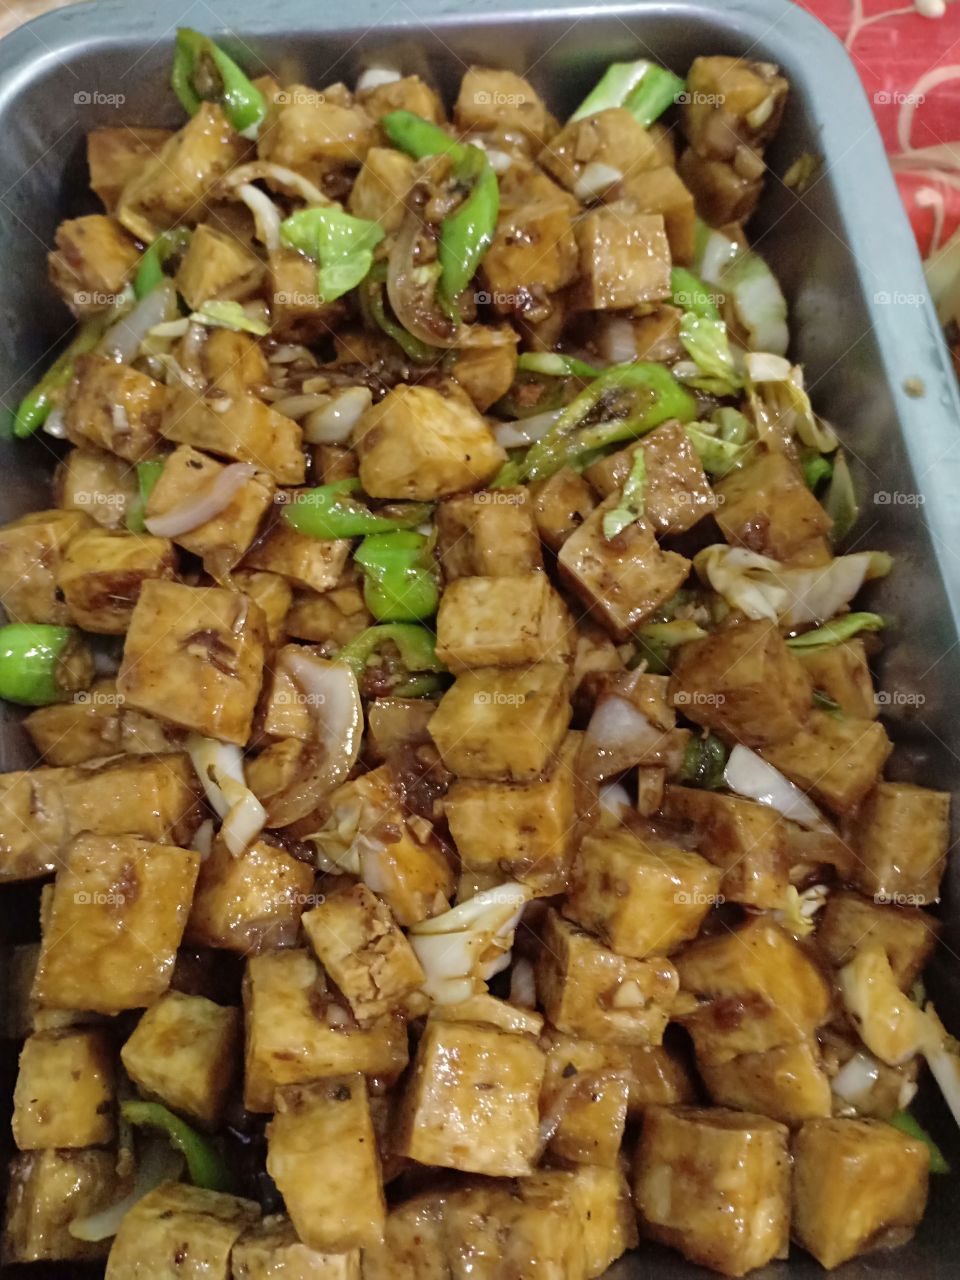 Savory spicy sautéed tofu in oysters sauce